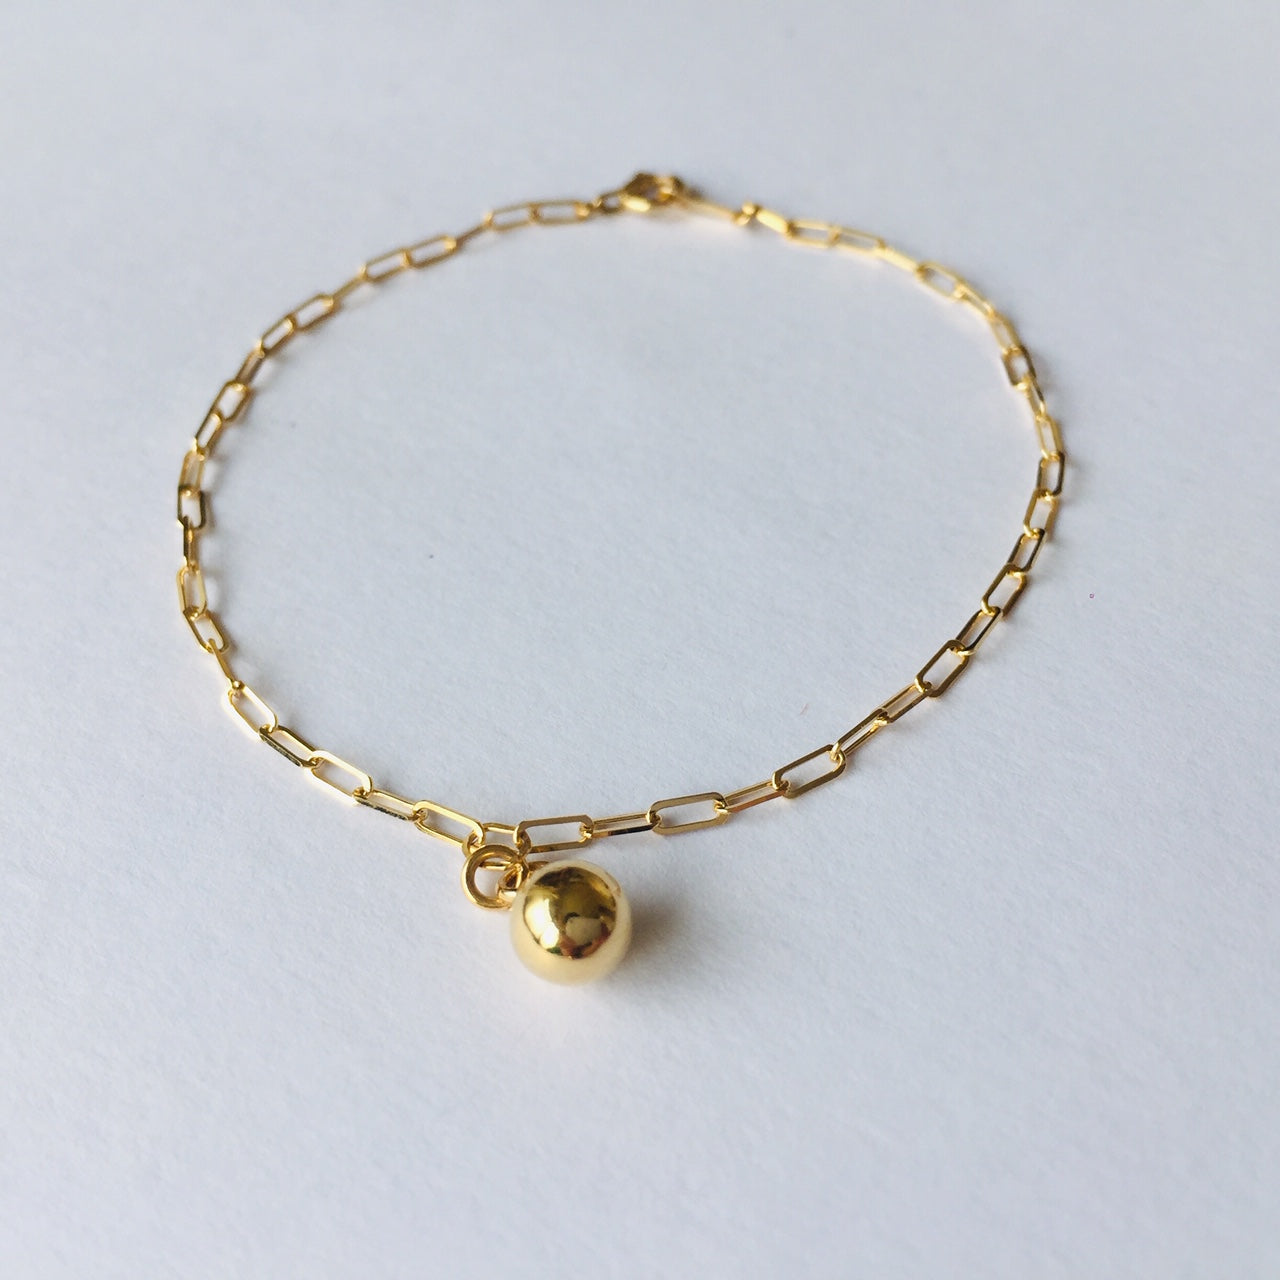 18K Gold Box Chain Bracelet with Gold Ball / Sphere Charm For Women  ゴールドボール・チャーム・ブレスレット